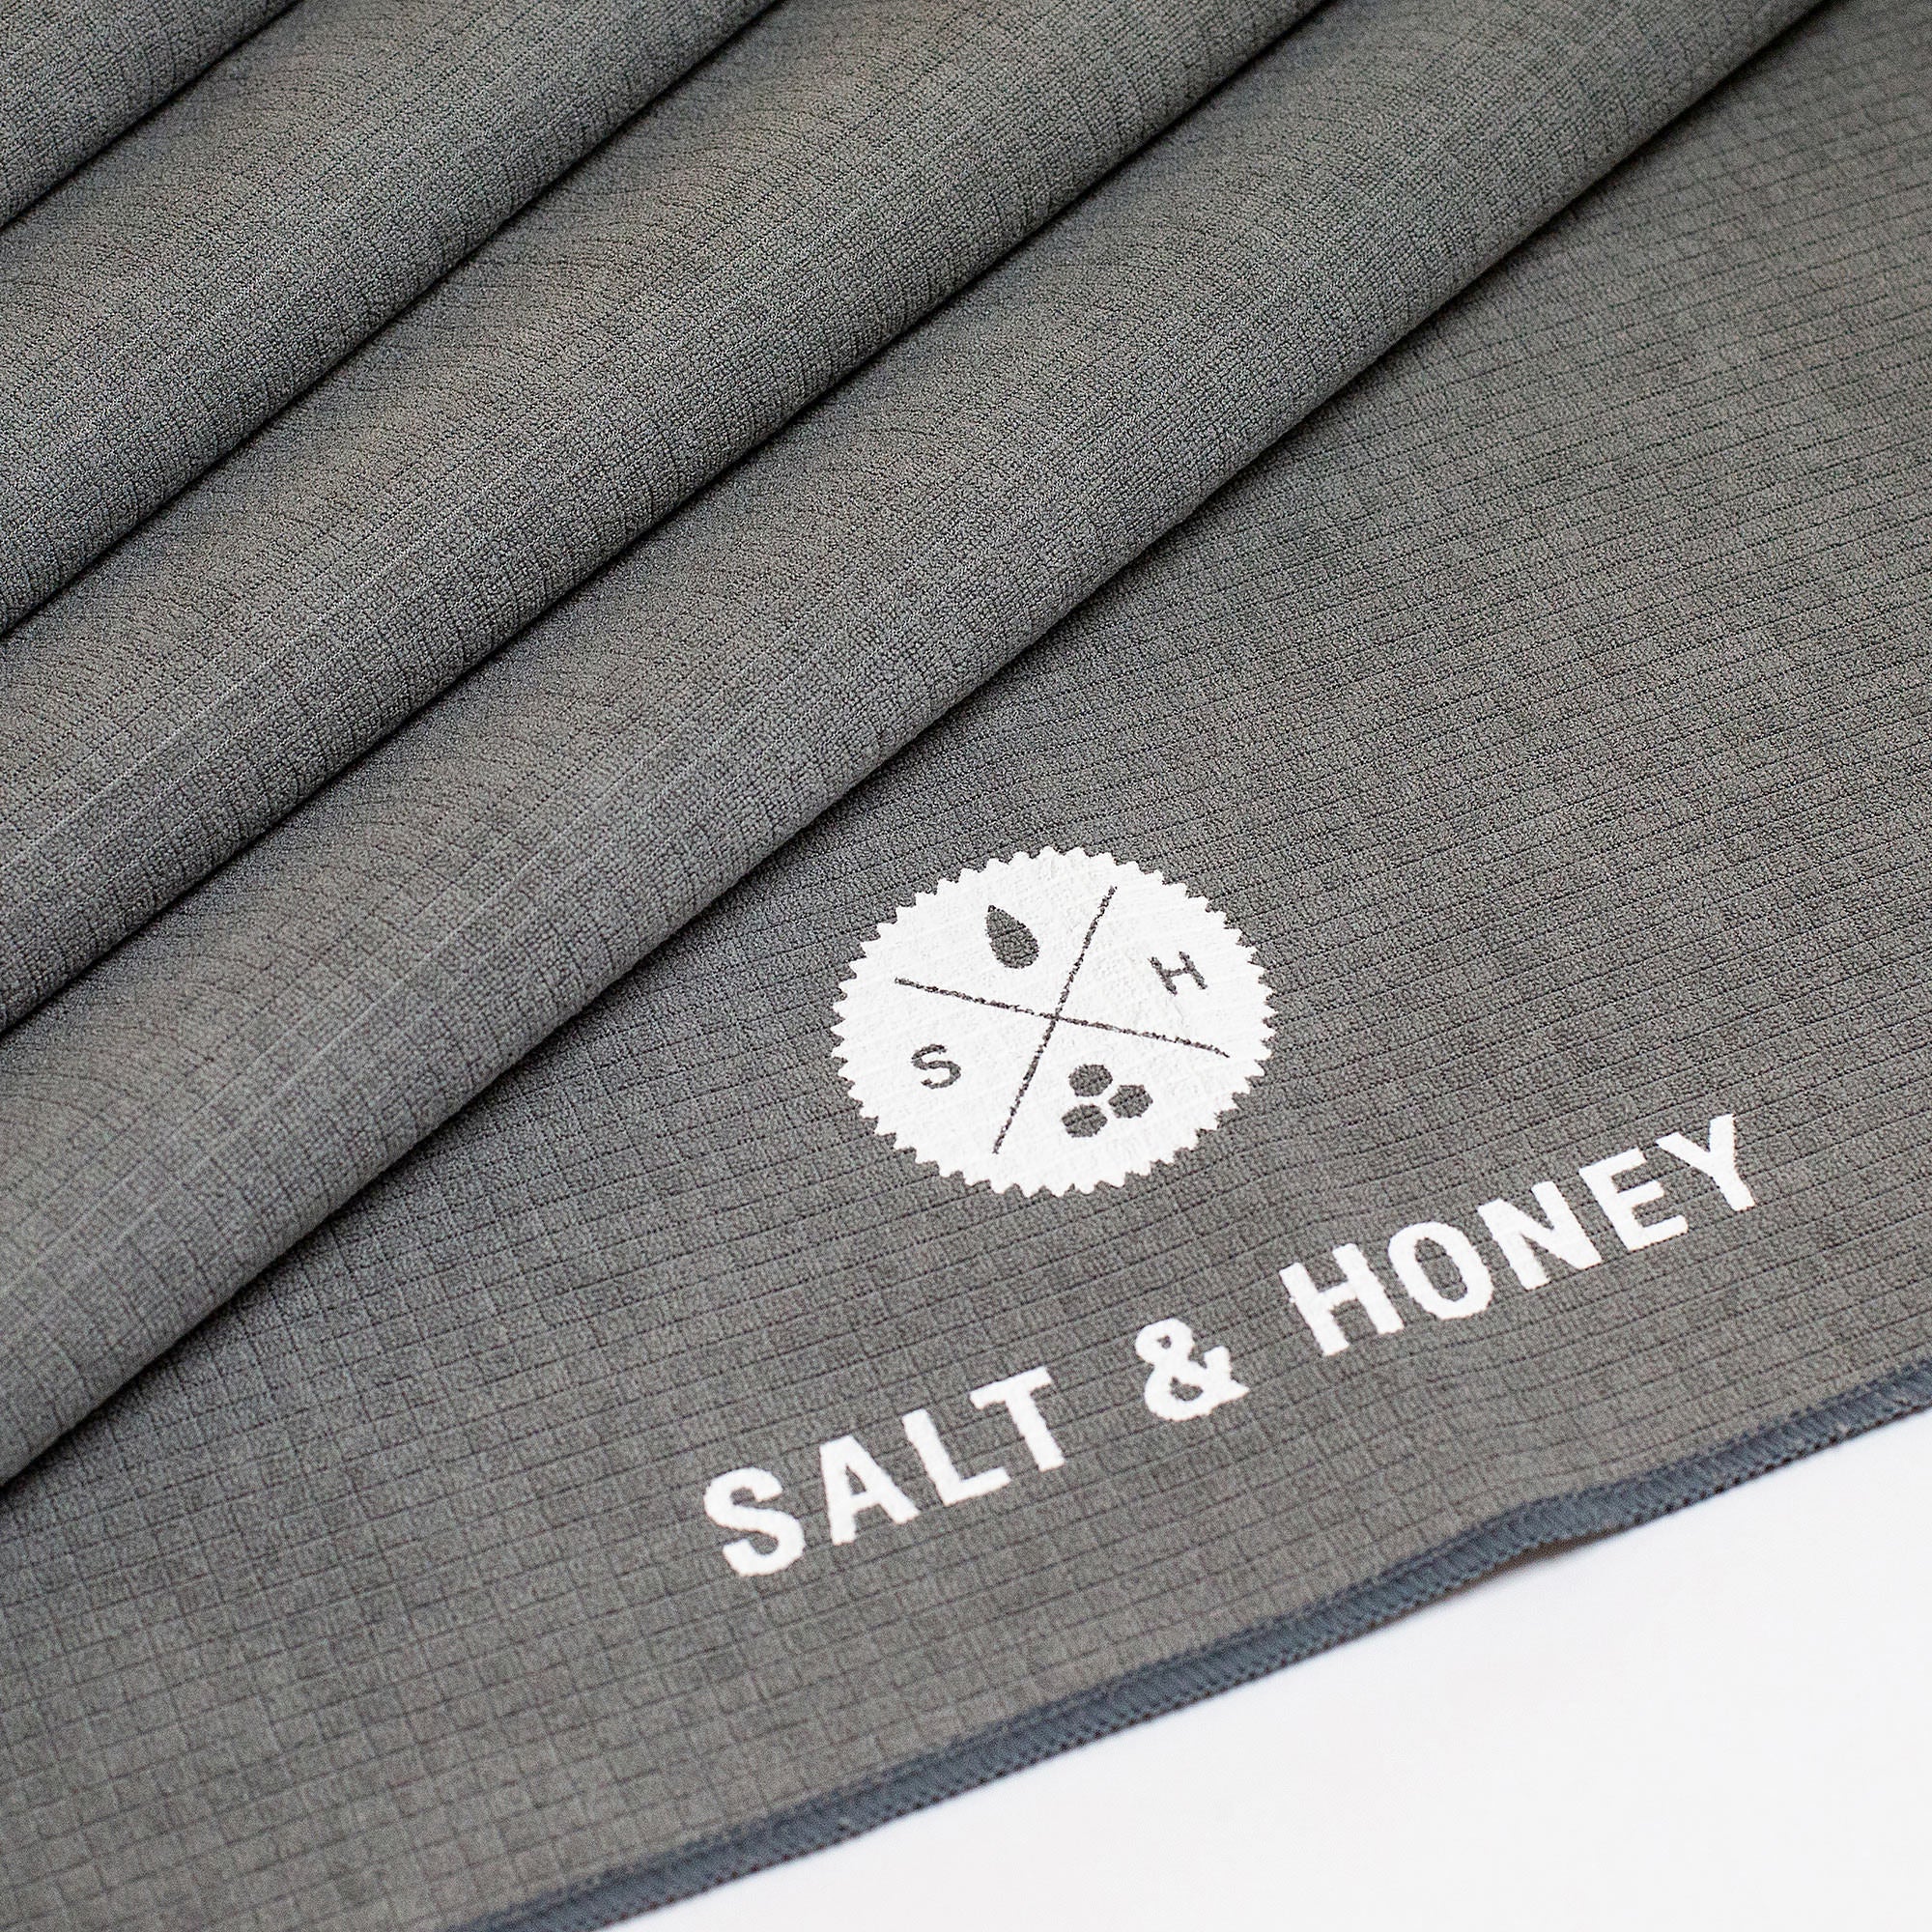 Salt & Honey Non-Slip Pilates Reformer Towel, Practice Pilates at Home  With These 12 Genius Products From